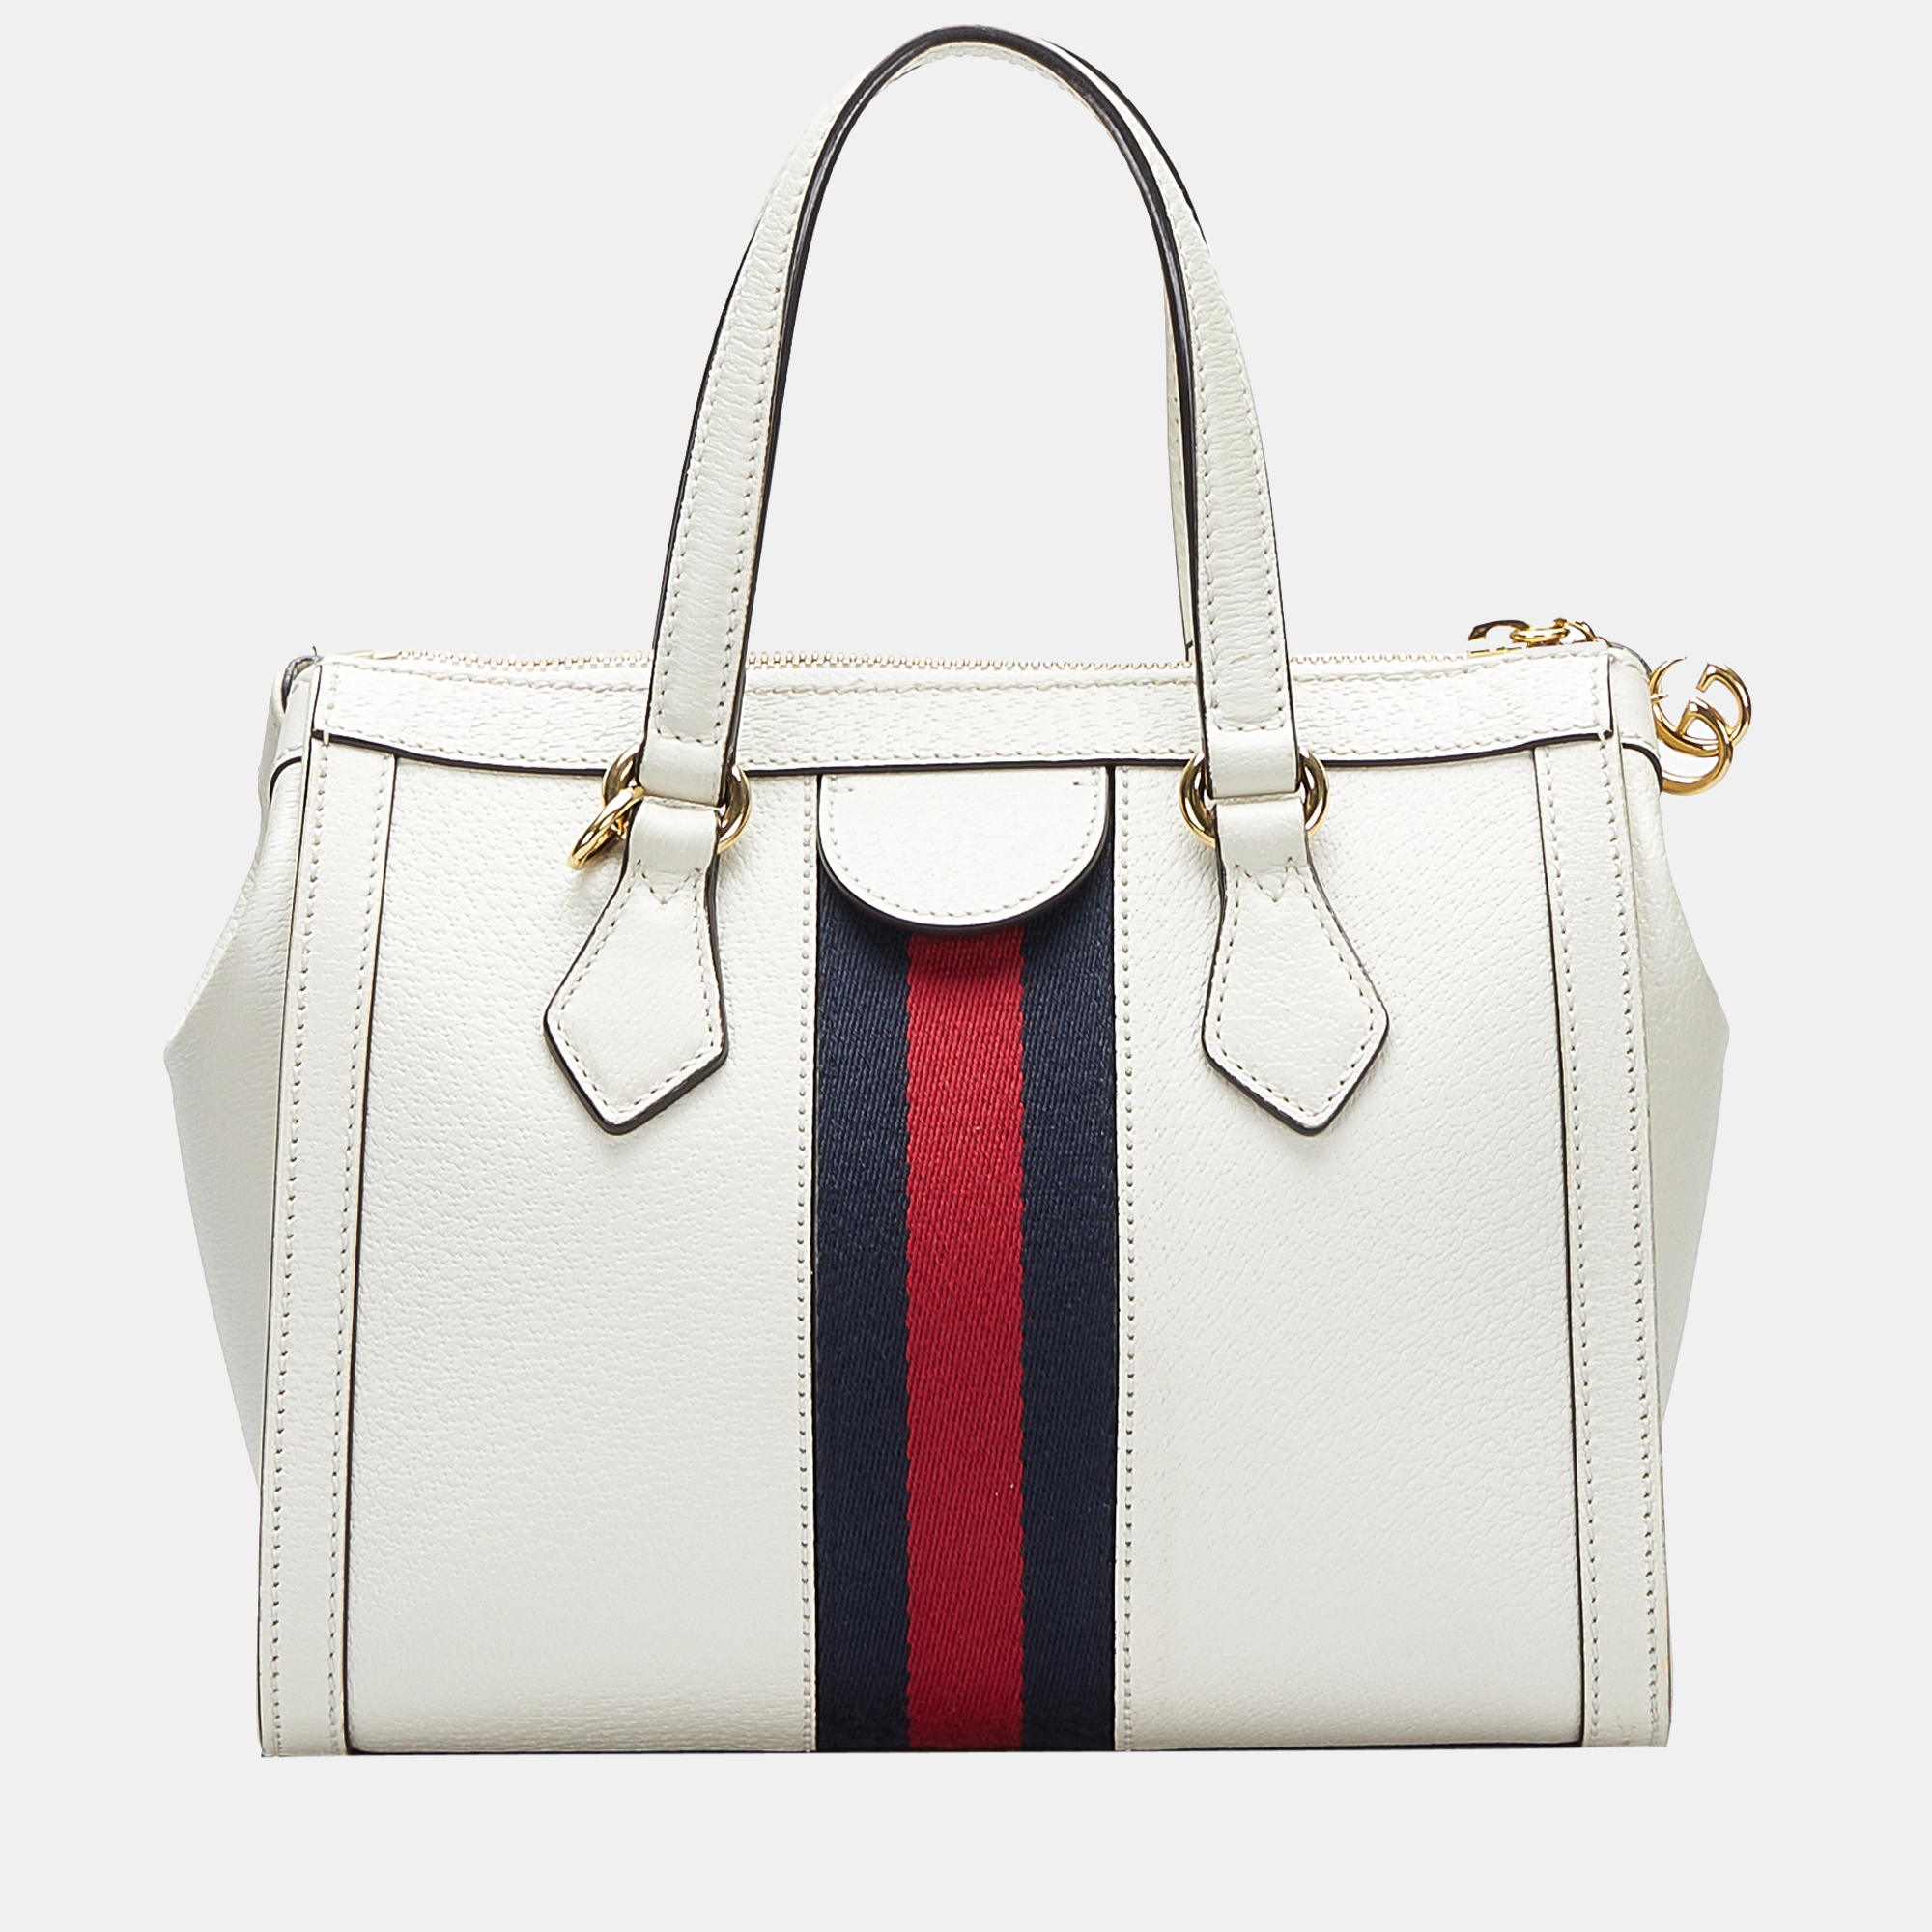 Gucci Ophidia Leather Satchel